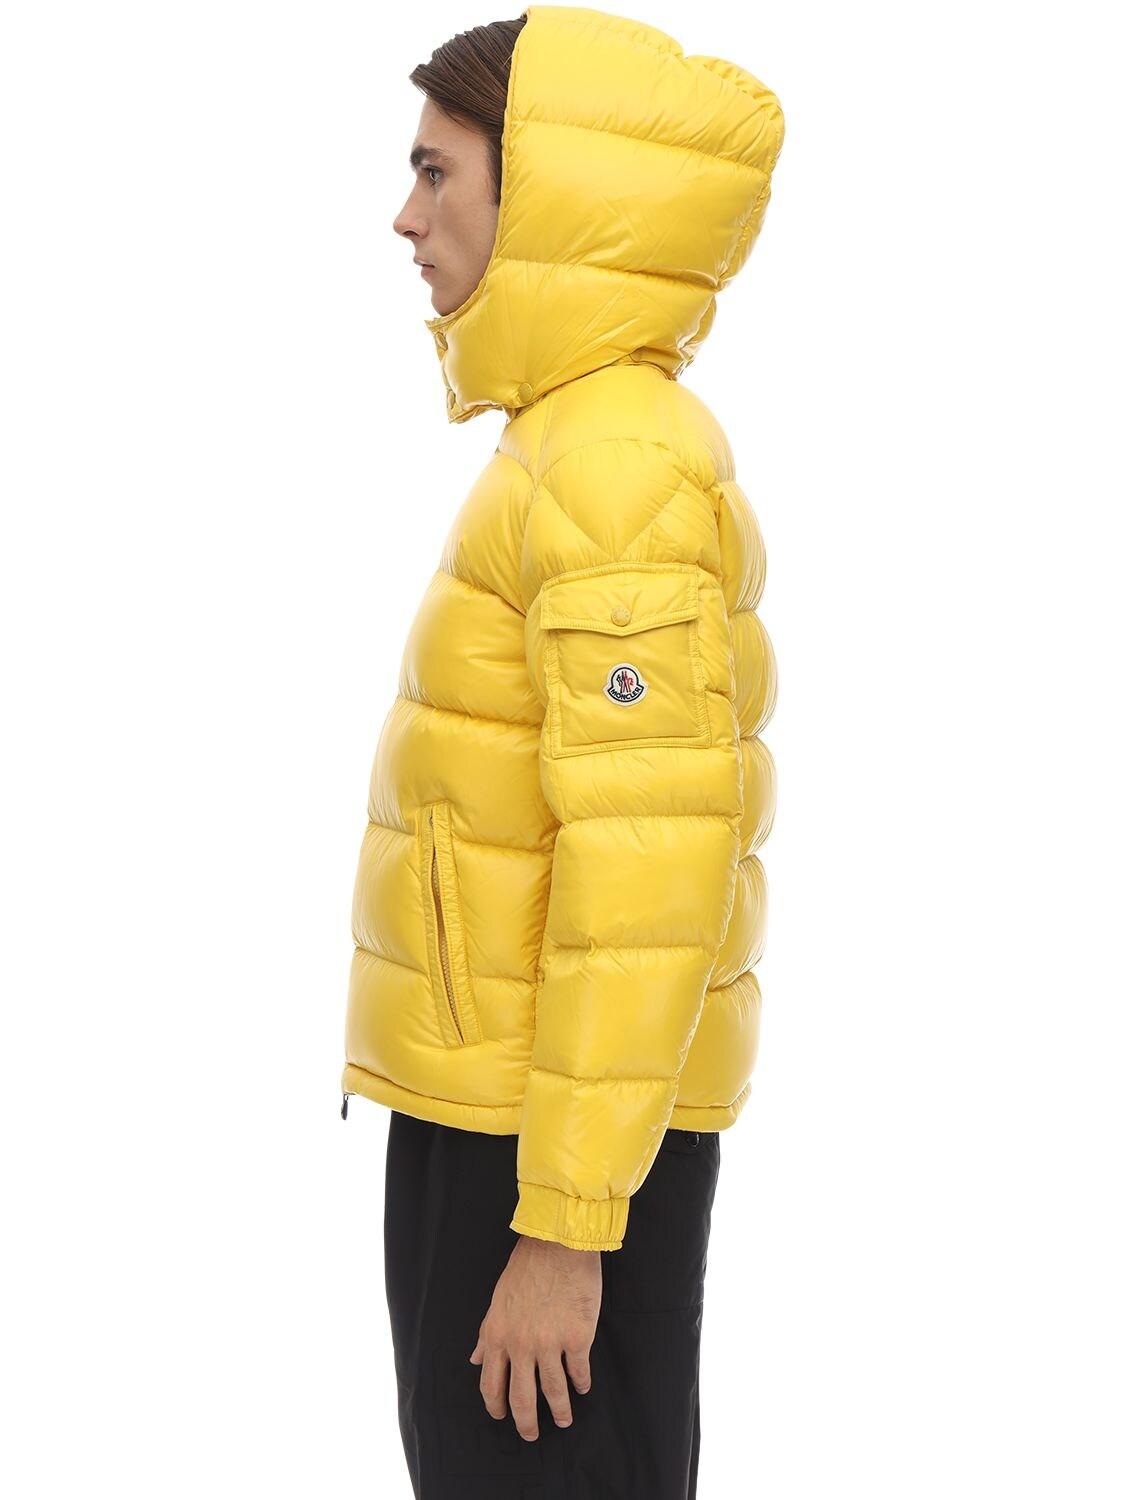 Moncler Synthetic Maya Down Jacket in Yellow for Men - Lyst